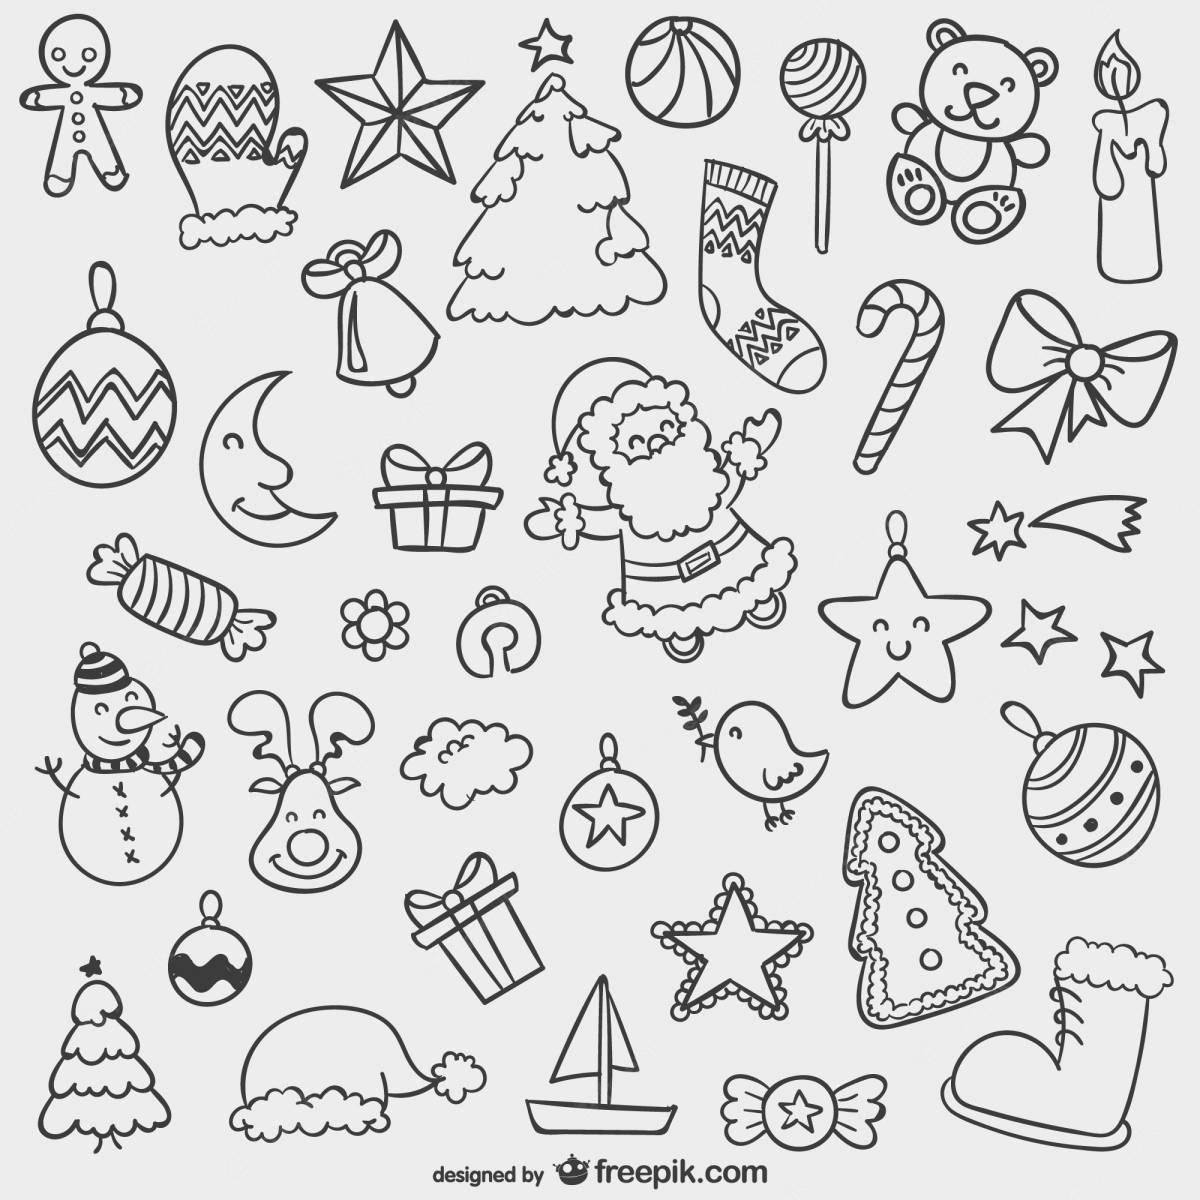 Playful Christmas stickers